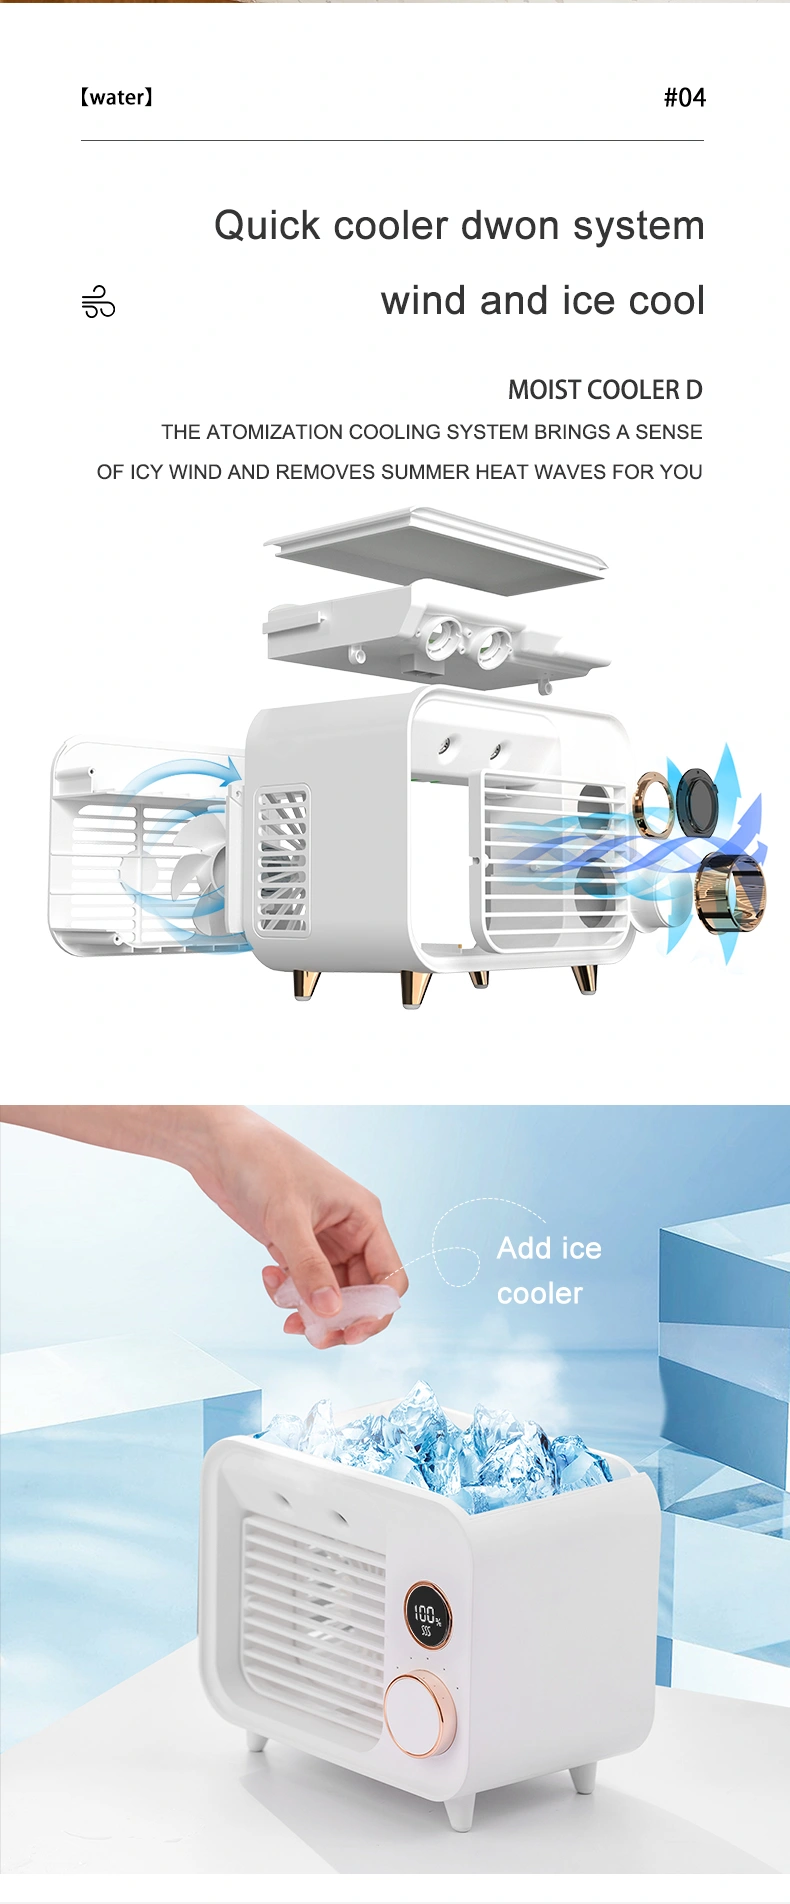 New LED Digital Display Home Appliance Portable Rechargeable Table Spray Mist Water Mini Electric USB Air Cooler Conditioner Desk Cool Fan